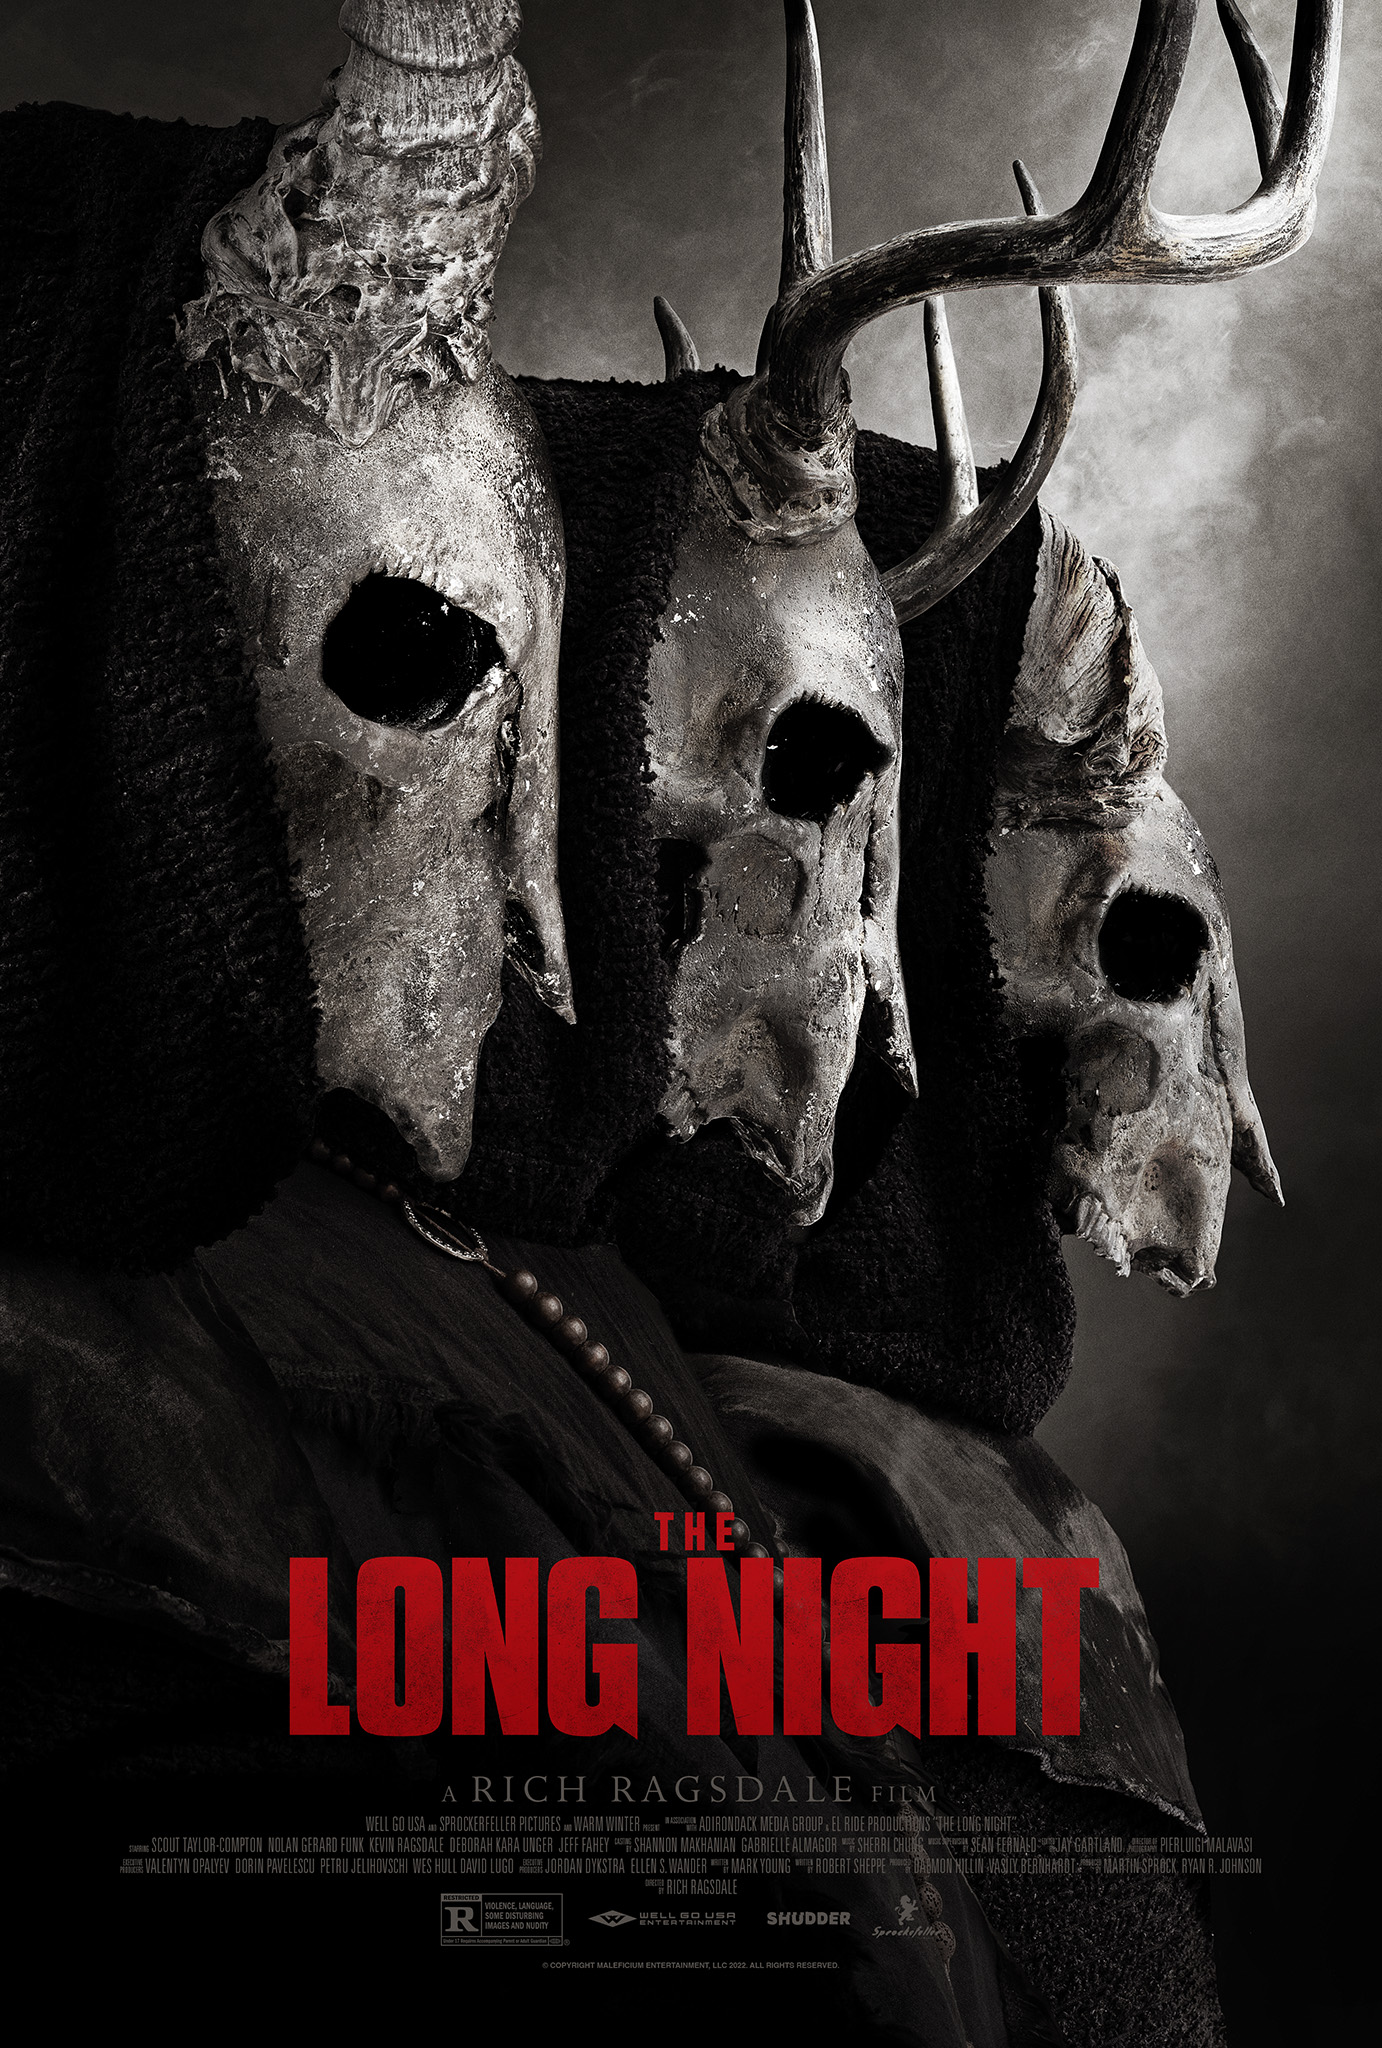 The Long Night – Teaser Poster